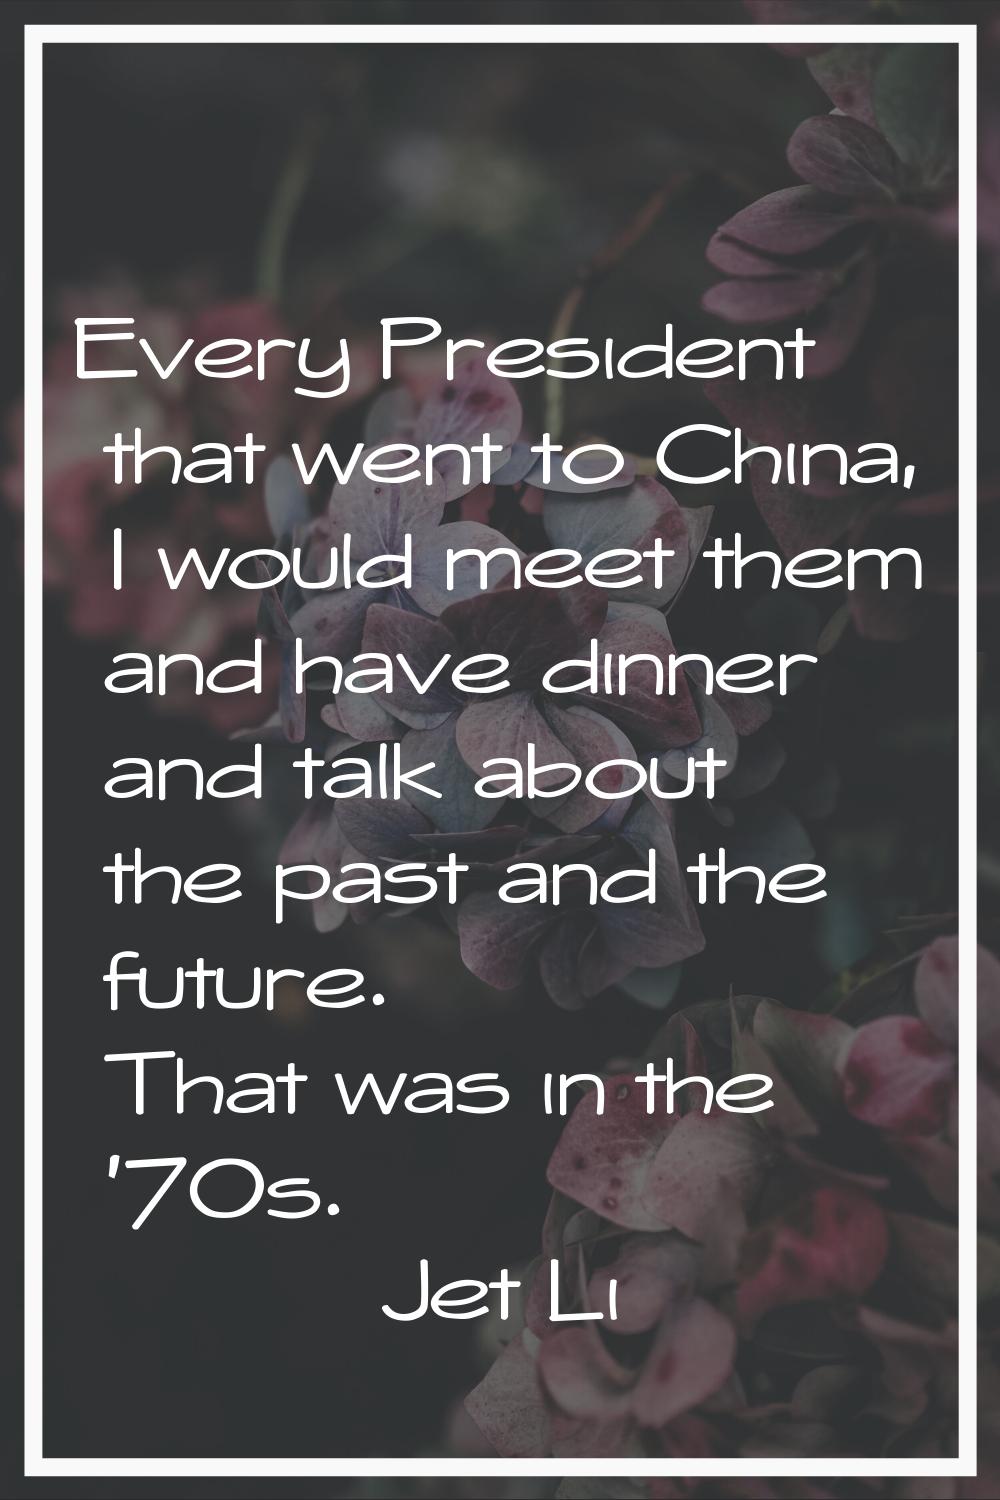 Every President that went to China, I would meet them and have dinner and talk about the past and t